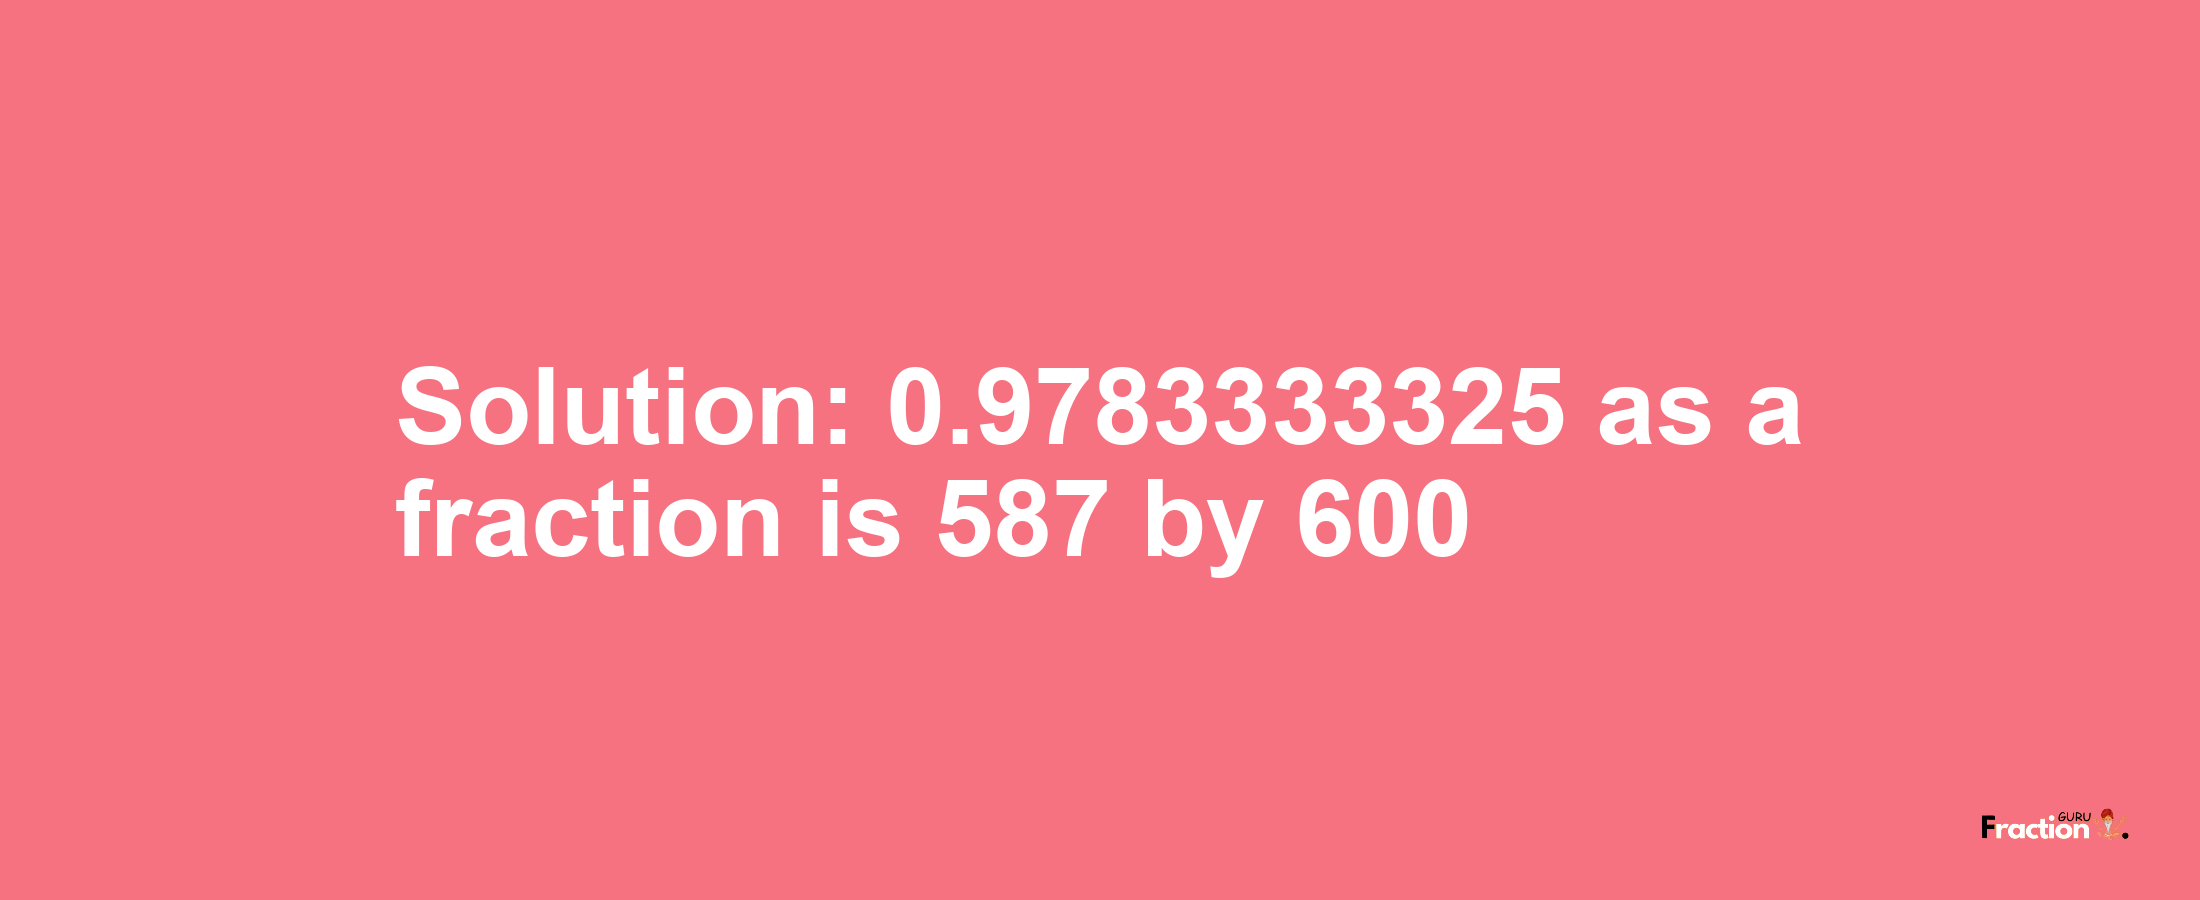 Solution:0.9783333325 as a fraction is 587/600